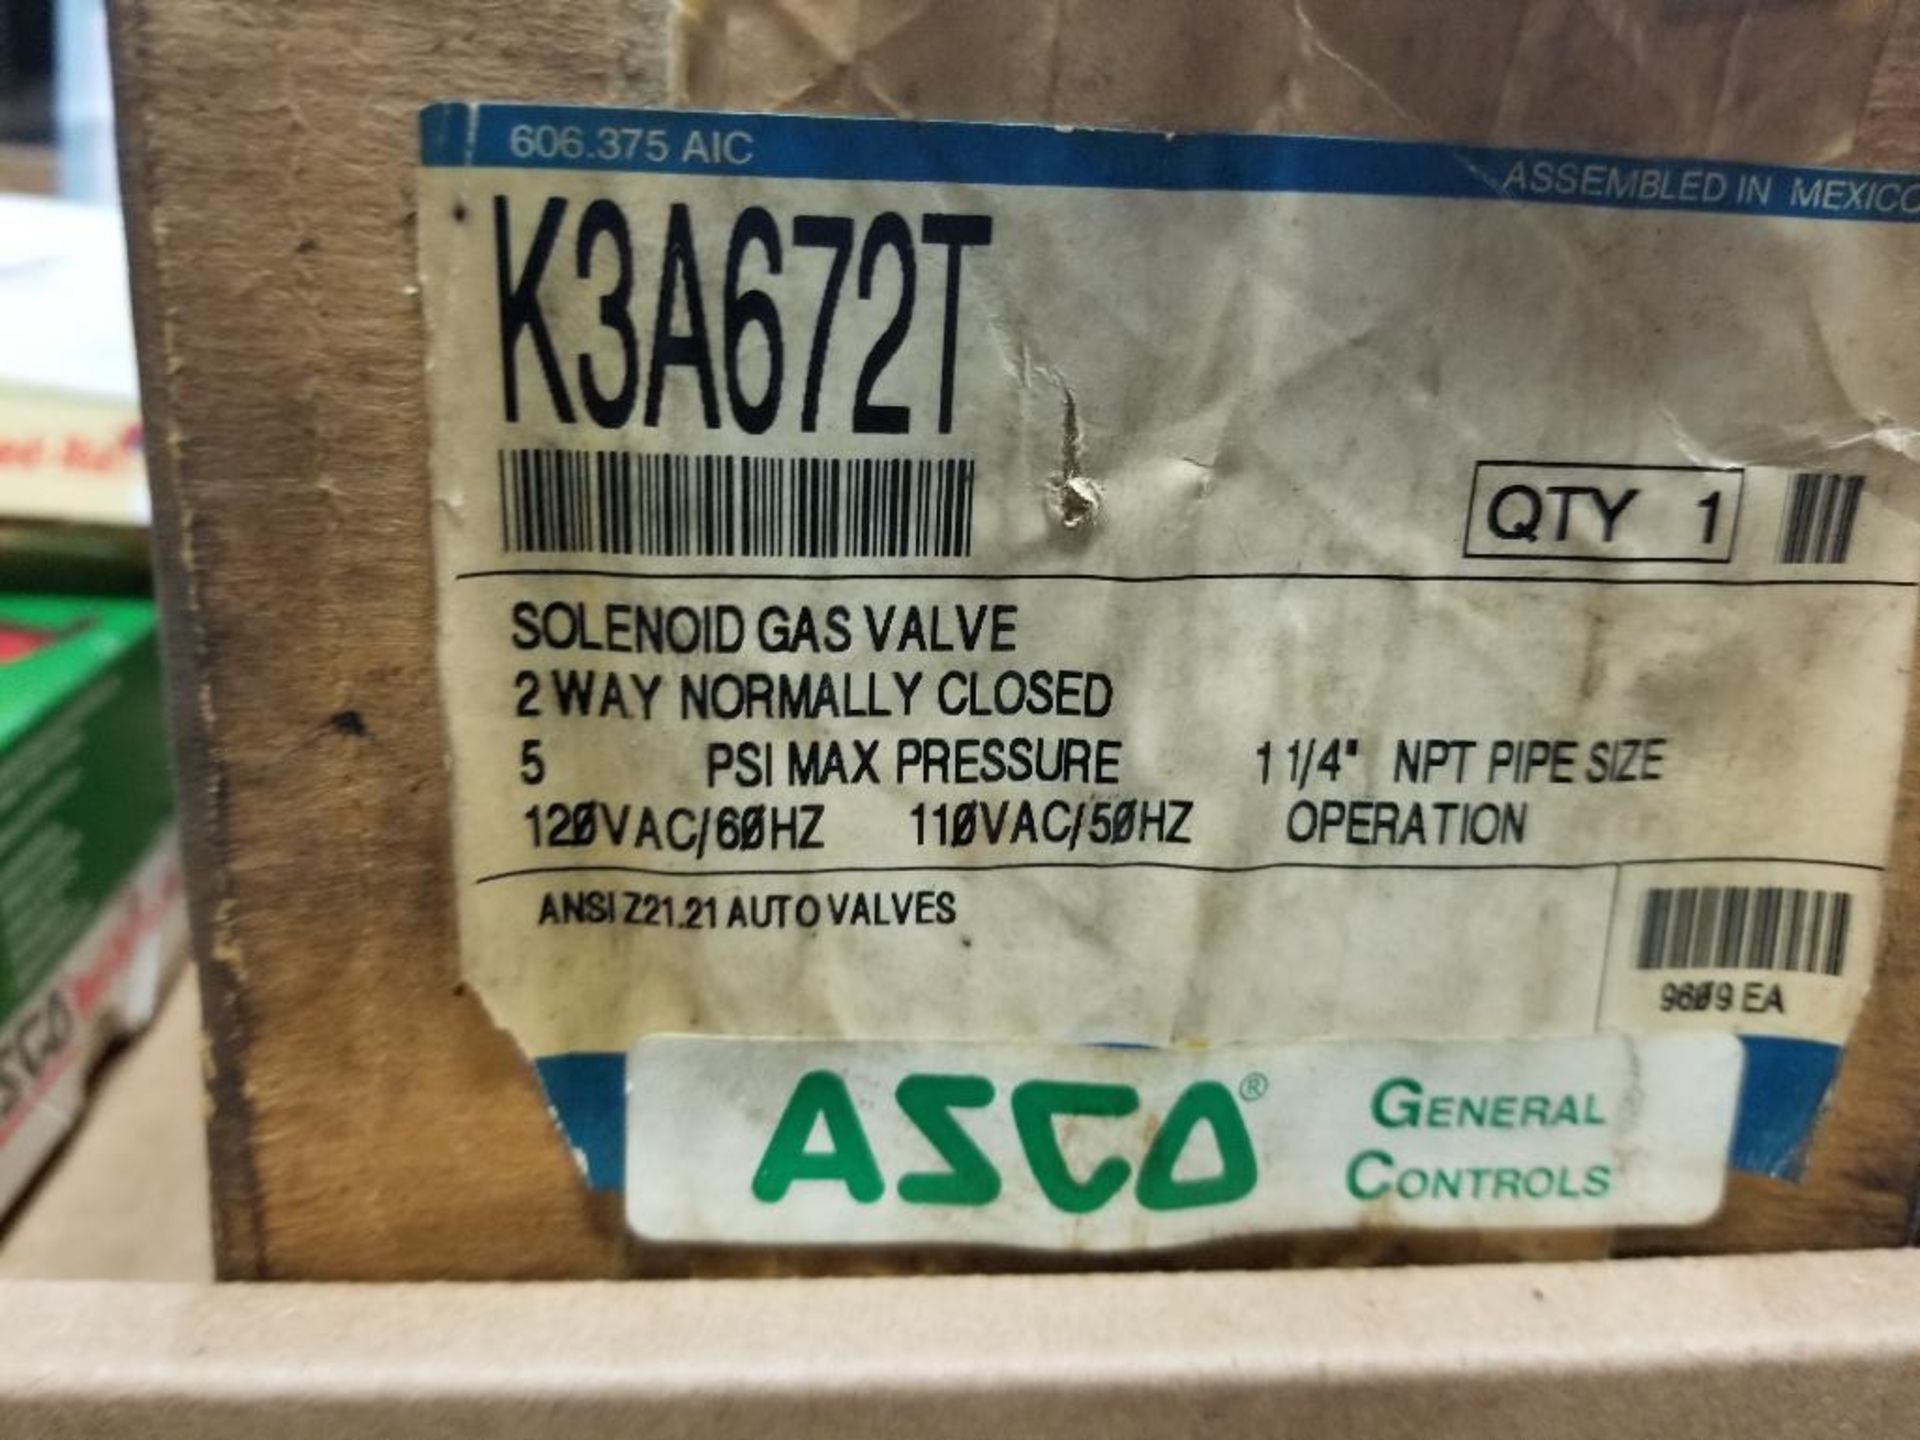 Qty 3 - Assorted Asco. 302-361 Kit, K3A672T Solenoid gas valve. - Image 2 of 6